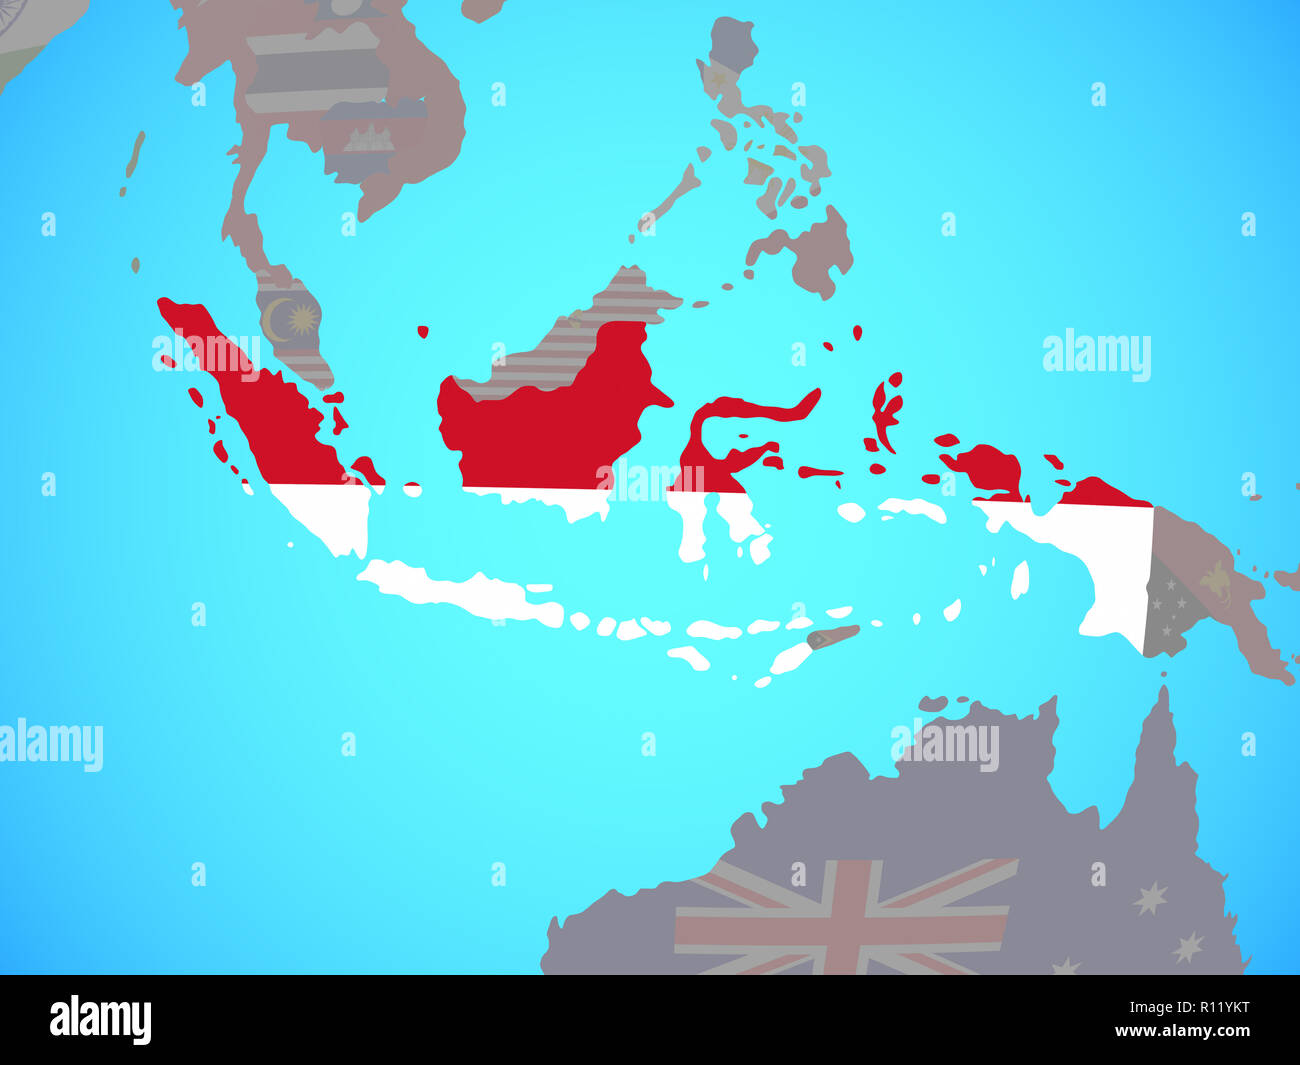 Indonesia with national flag on blue political globe. 3D illustration. Stock Photo